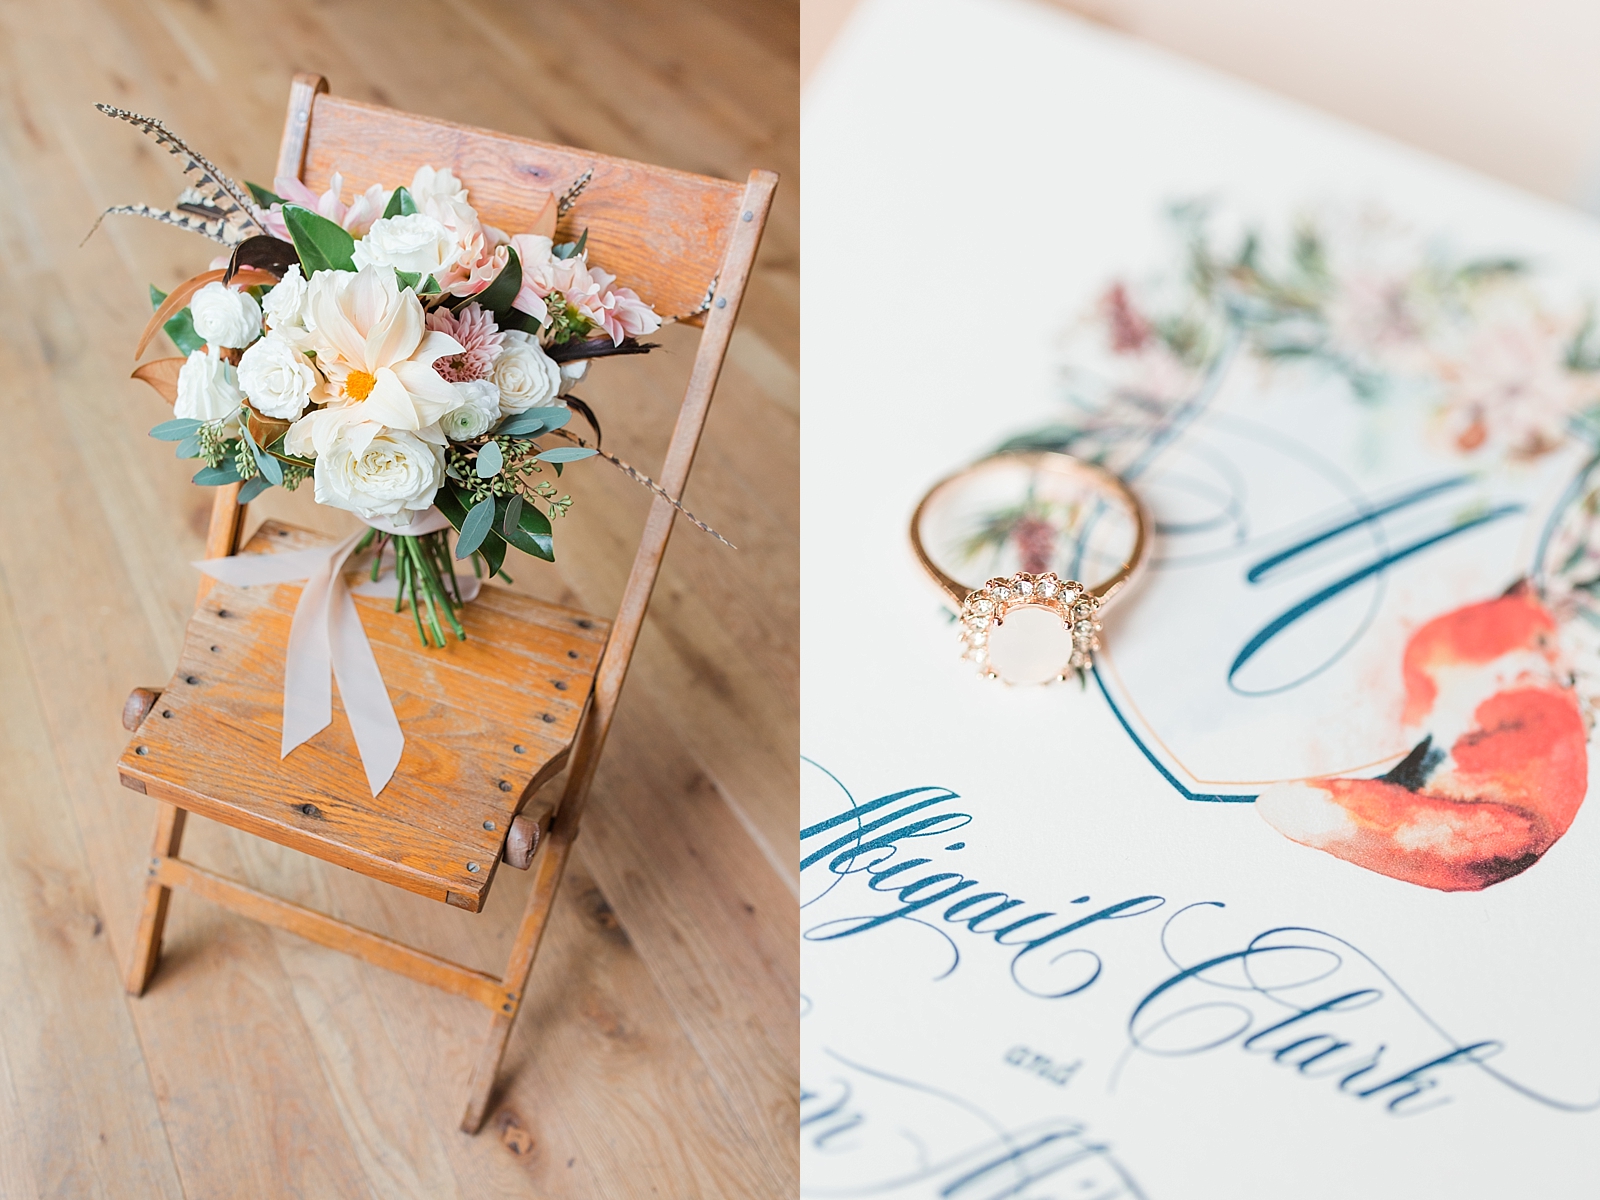 Juliette Chapel Wedding Bridal bouquet in Chair and Detail of wedding ring on invitation Photos